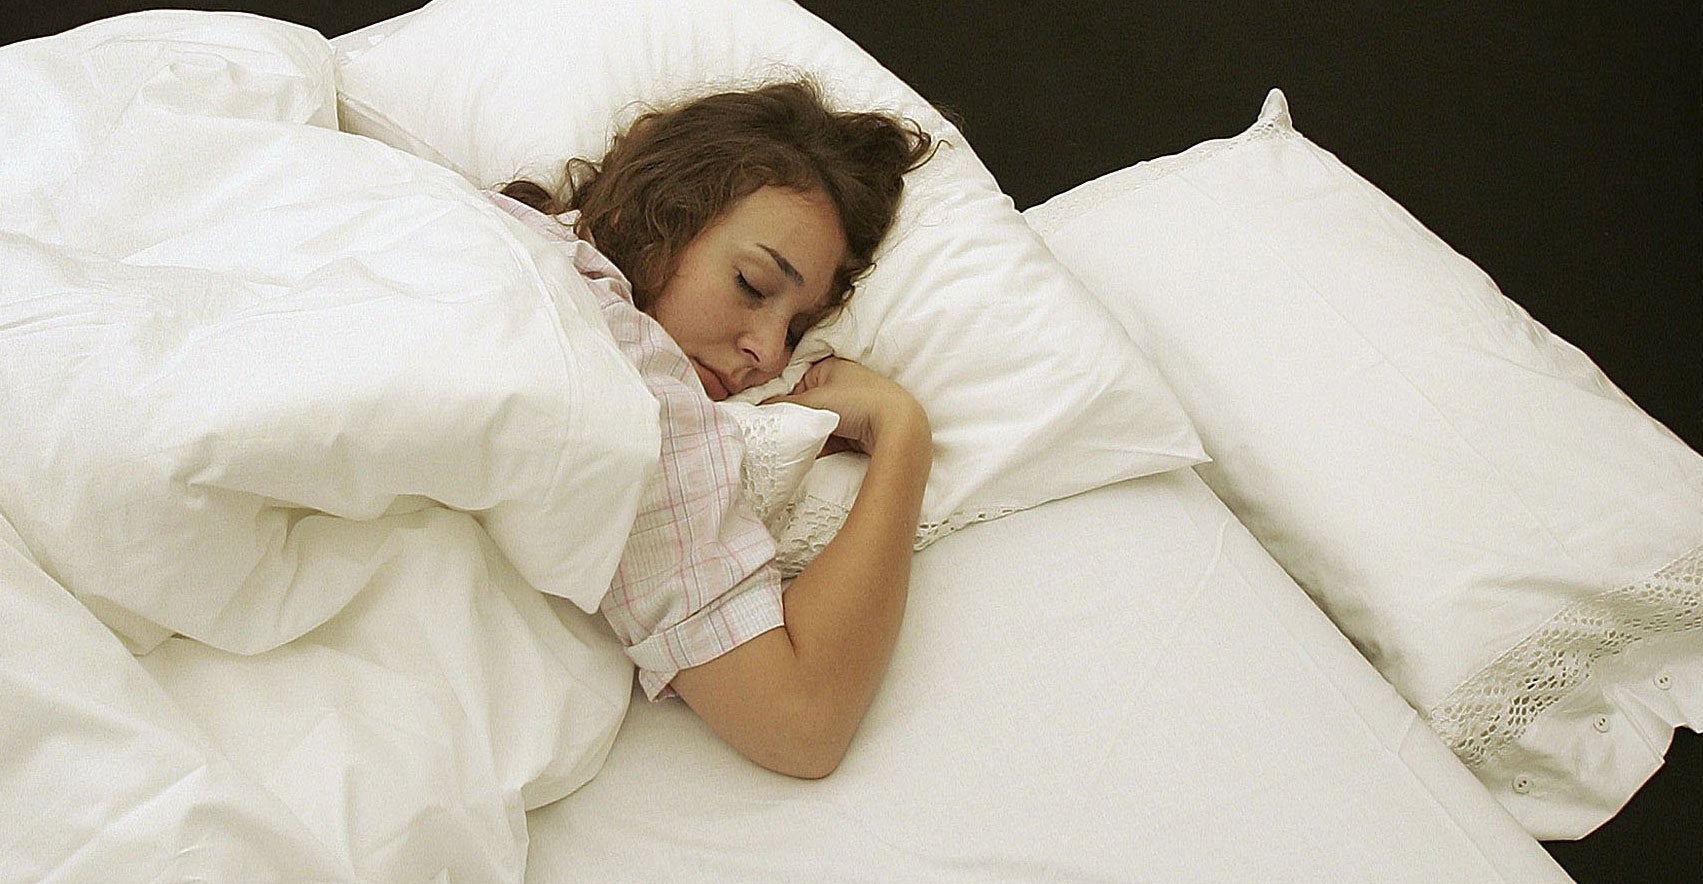 A new study suggests that people in modern societies are getting enough sleep